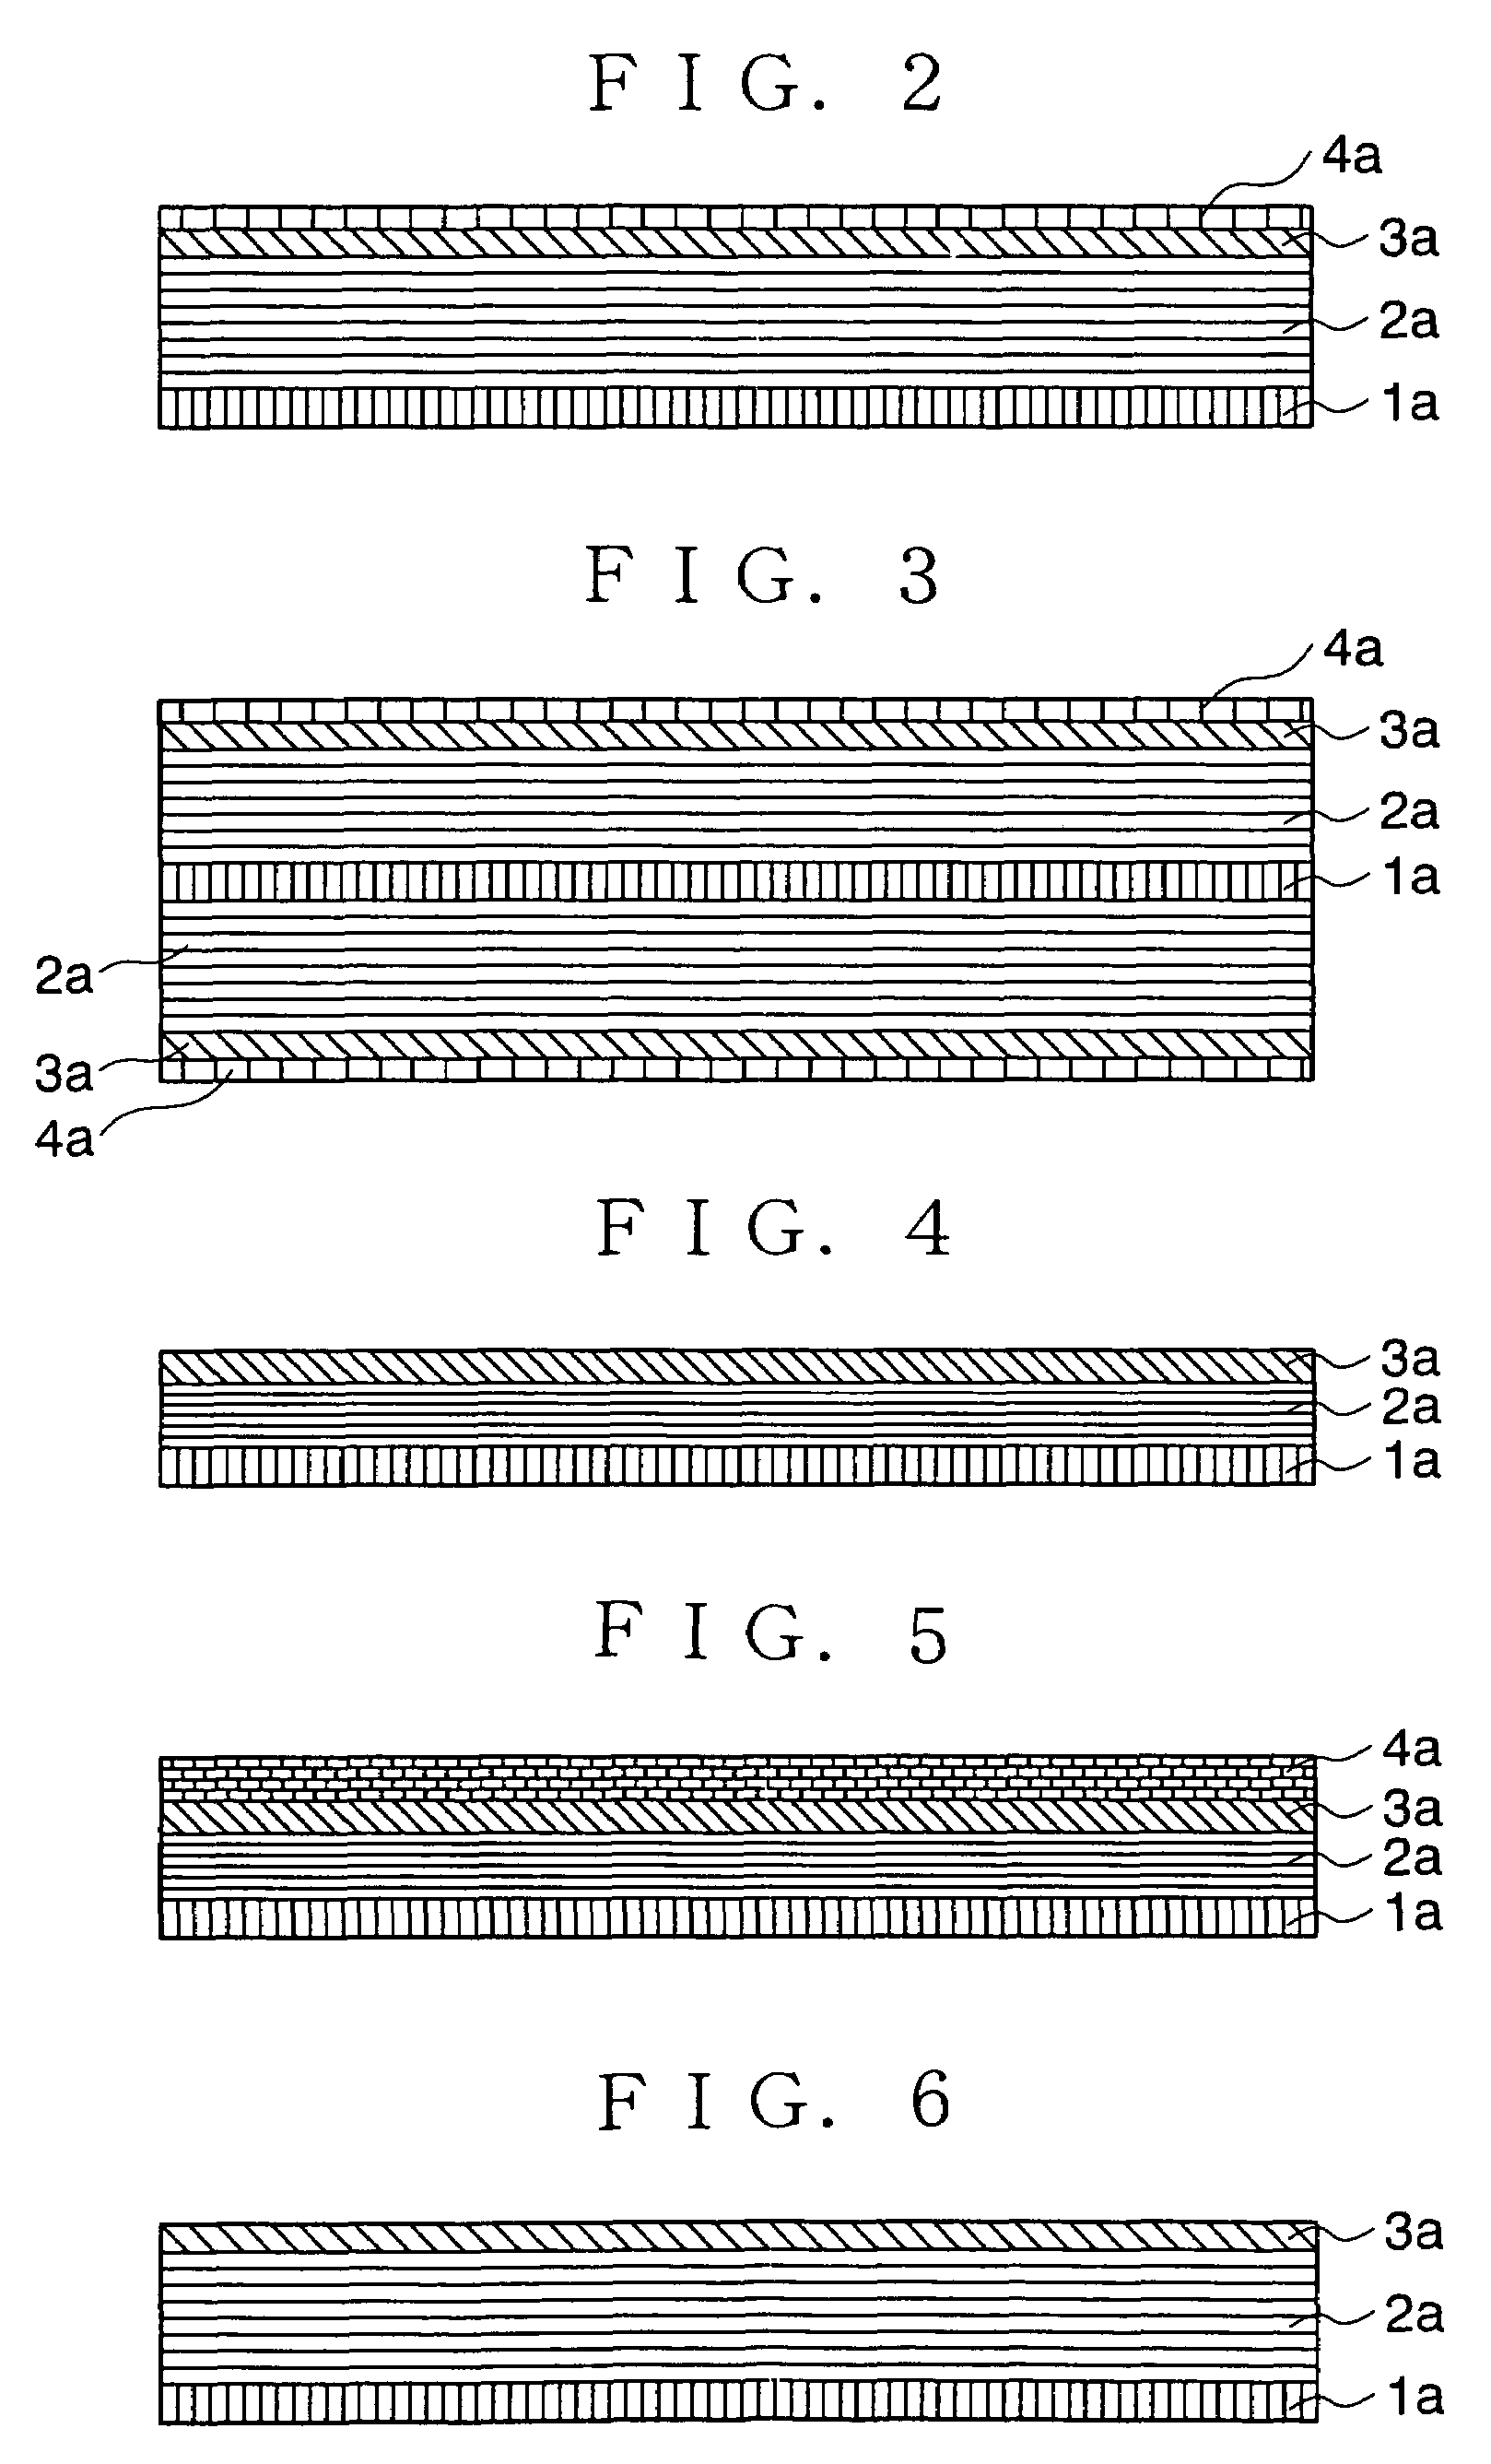 Anode for secondary battery, secondary battery using same and method for fabricating anode